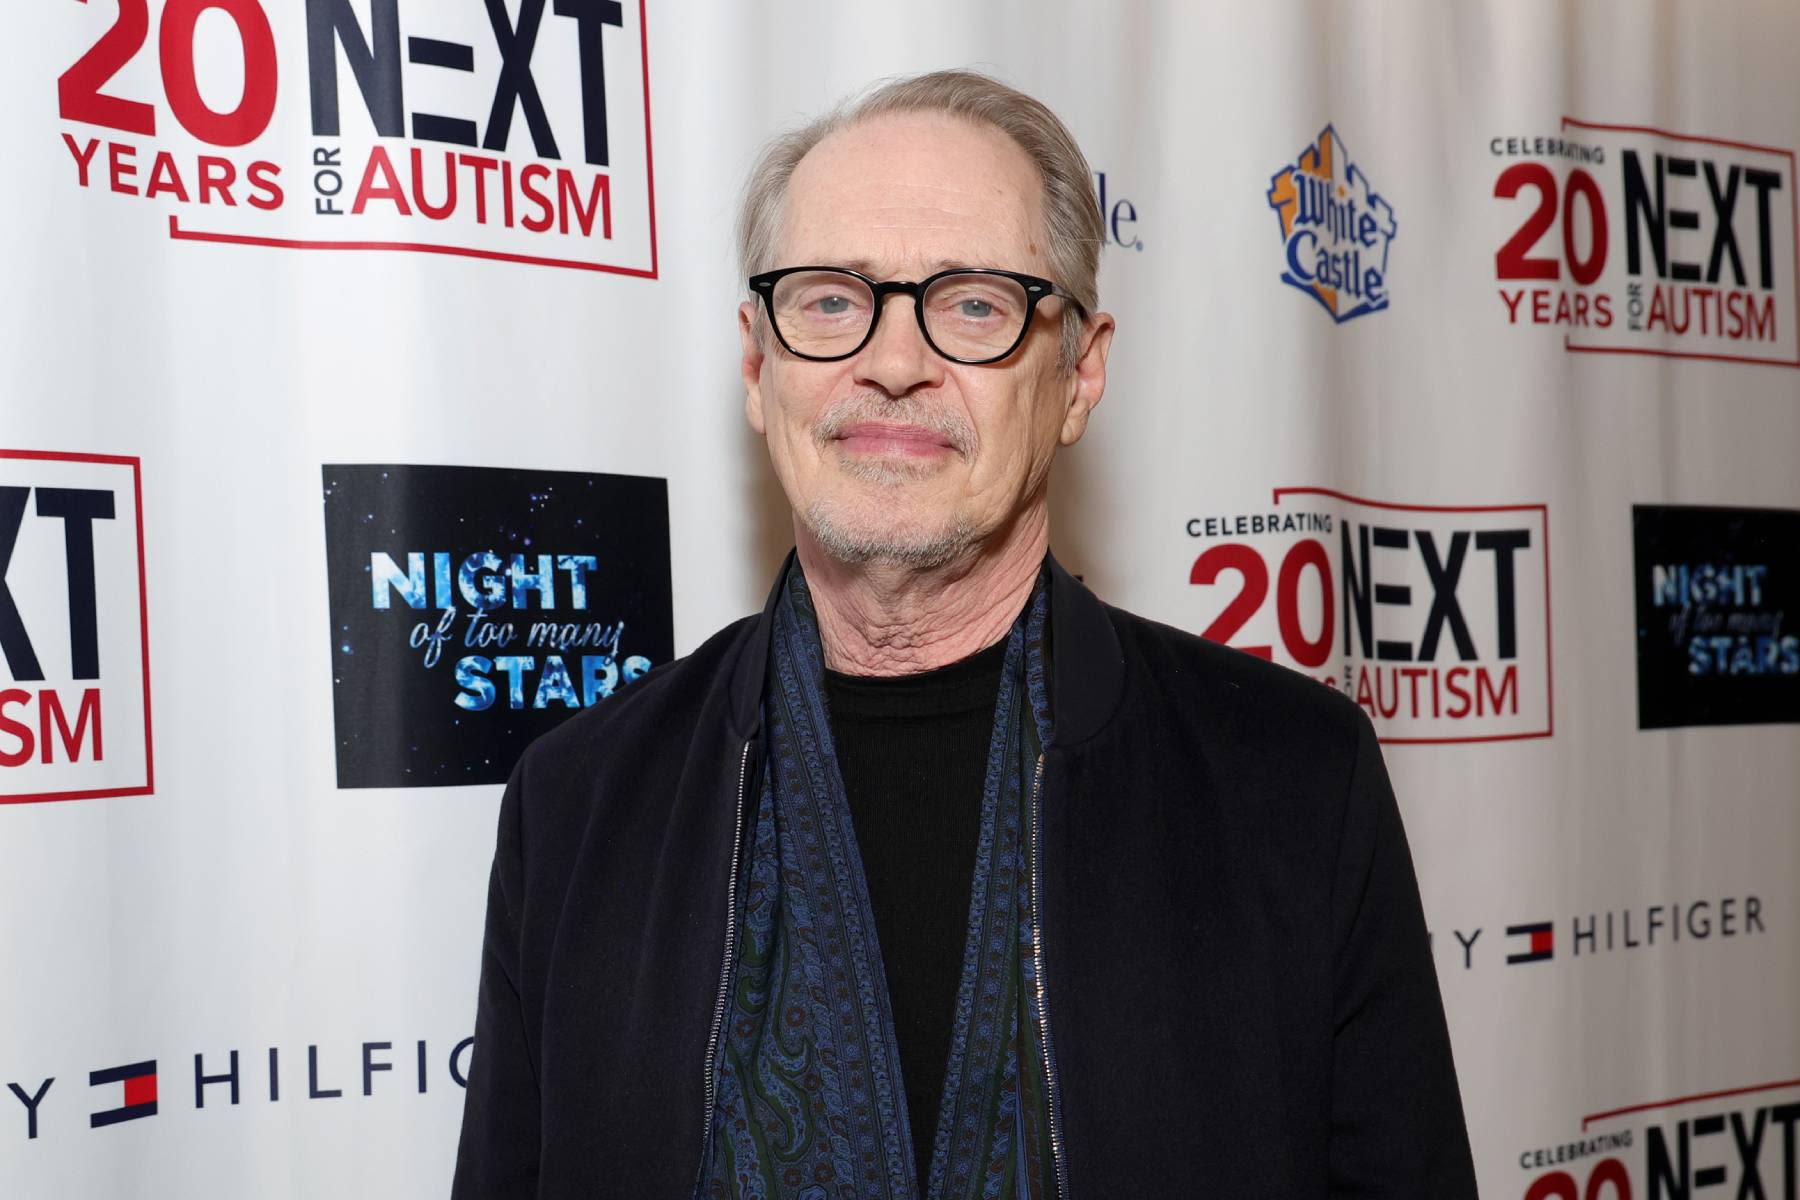 Alleged Steve Buscemi Attacker Arrested, Charged With Assault After NYC Incident